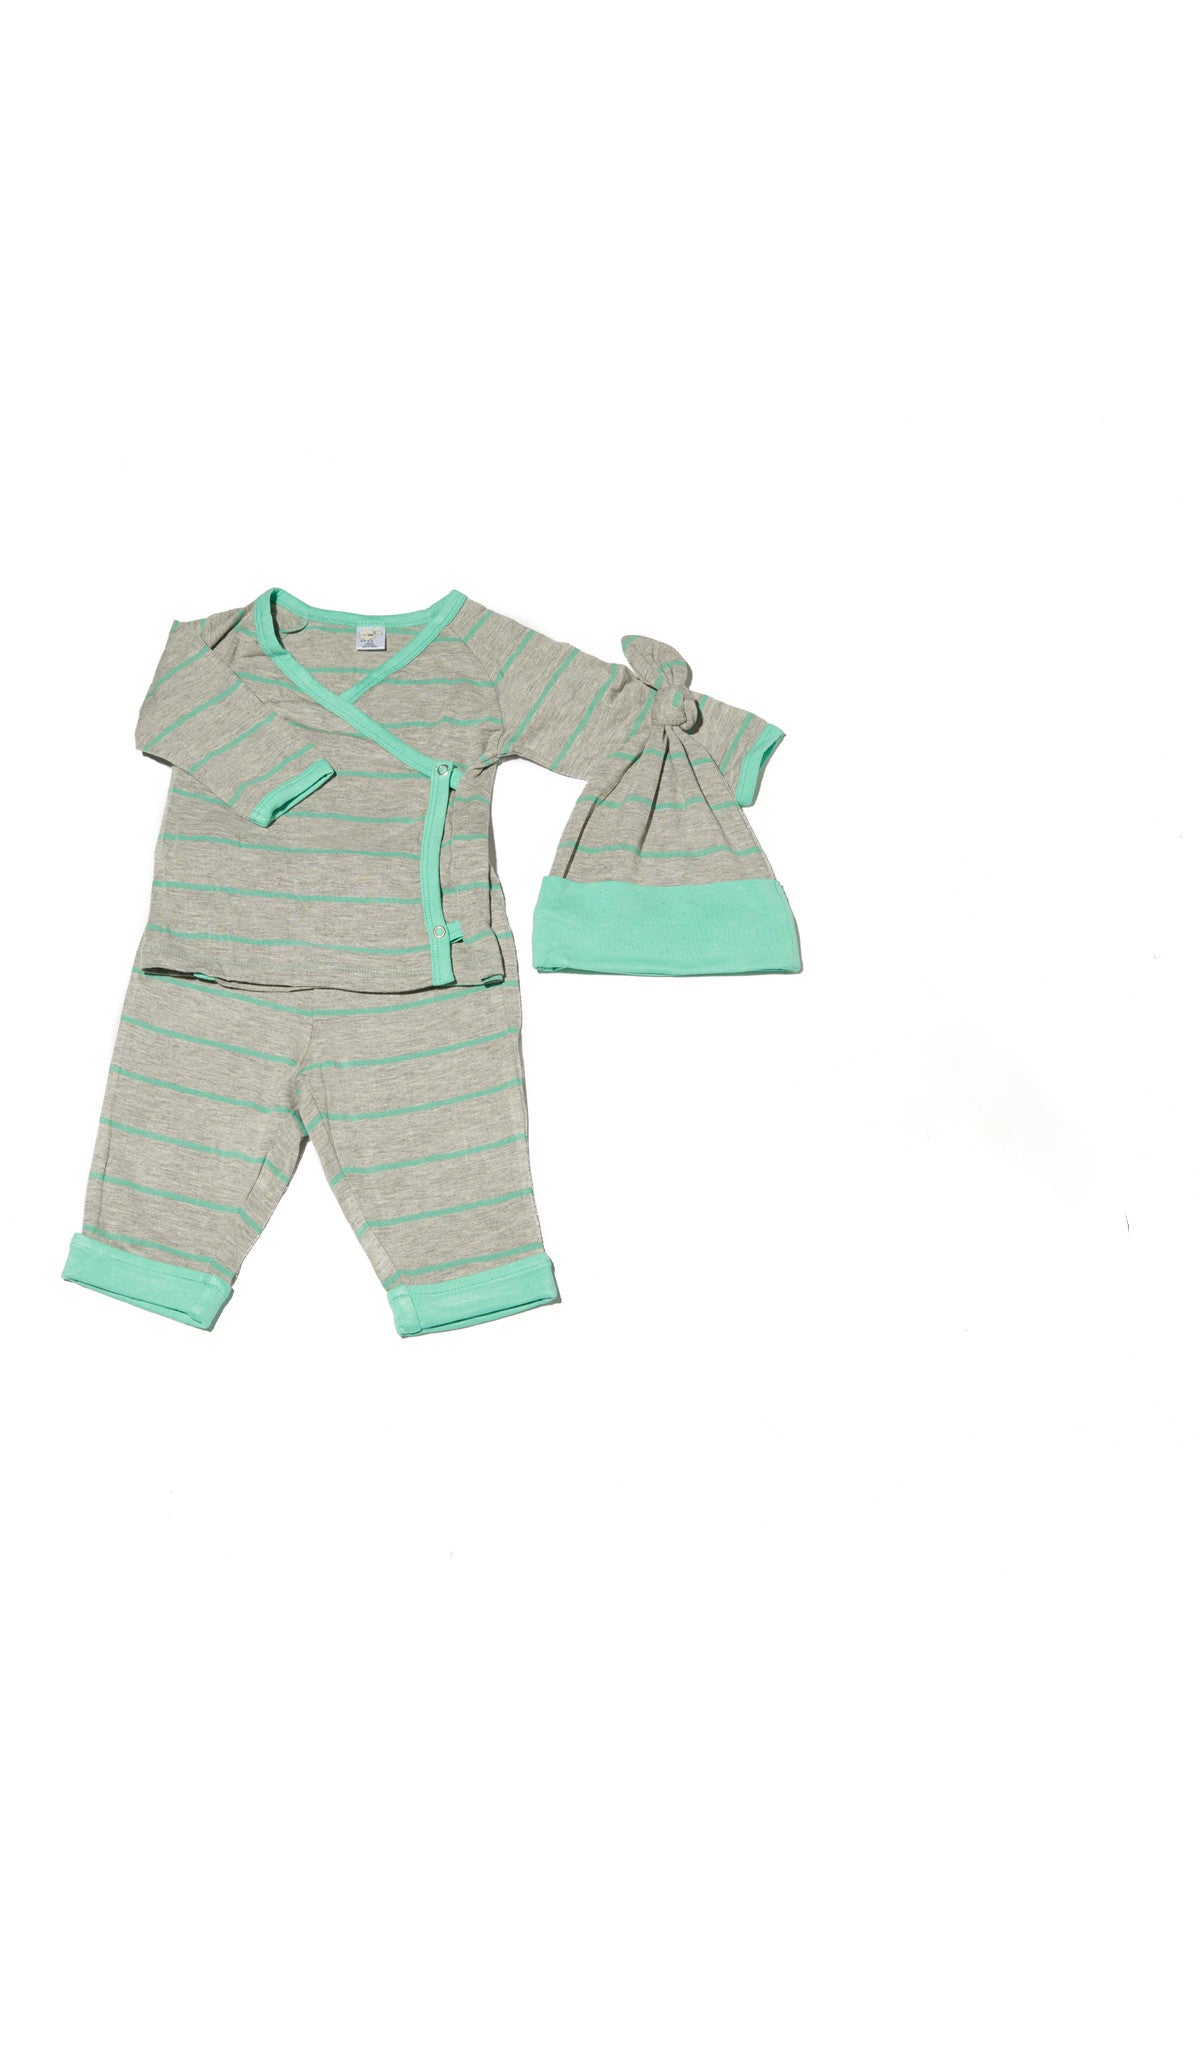 Baby's Take-Me-Home 3 Piece Sea Foam flat shot showing long sleeve kimono, cuffed pant and knotted baby hat.